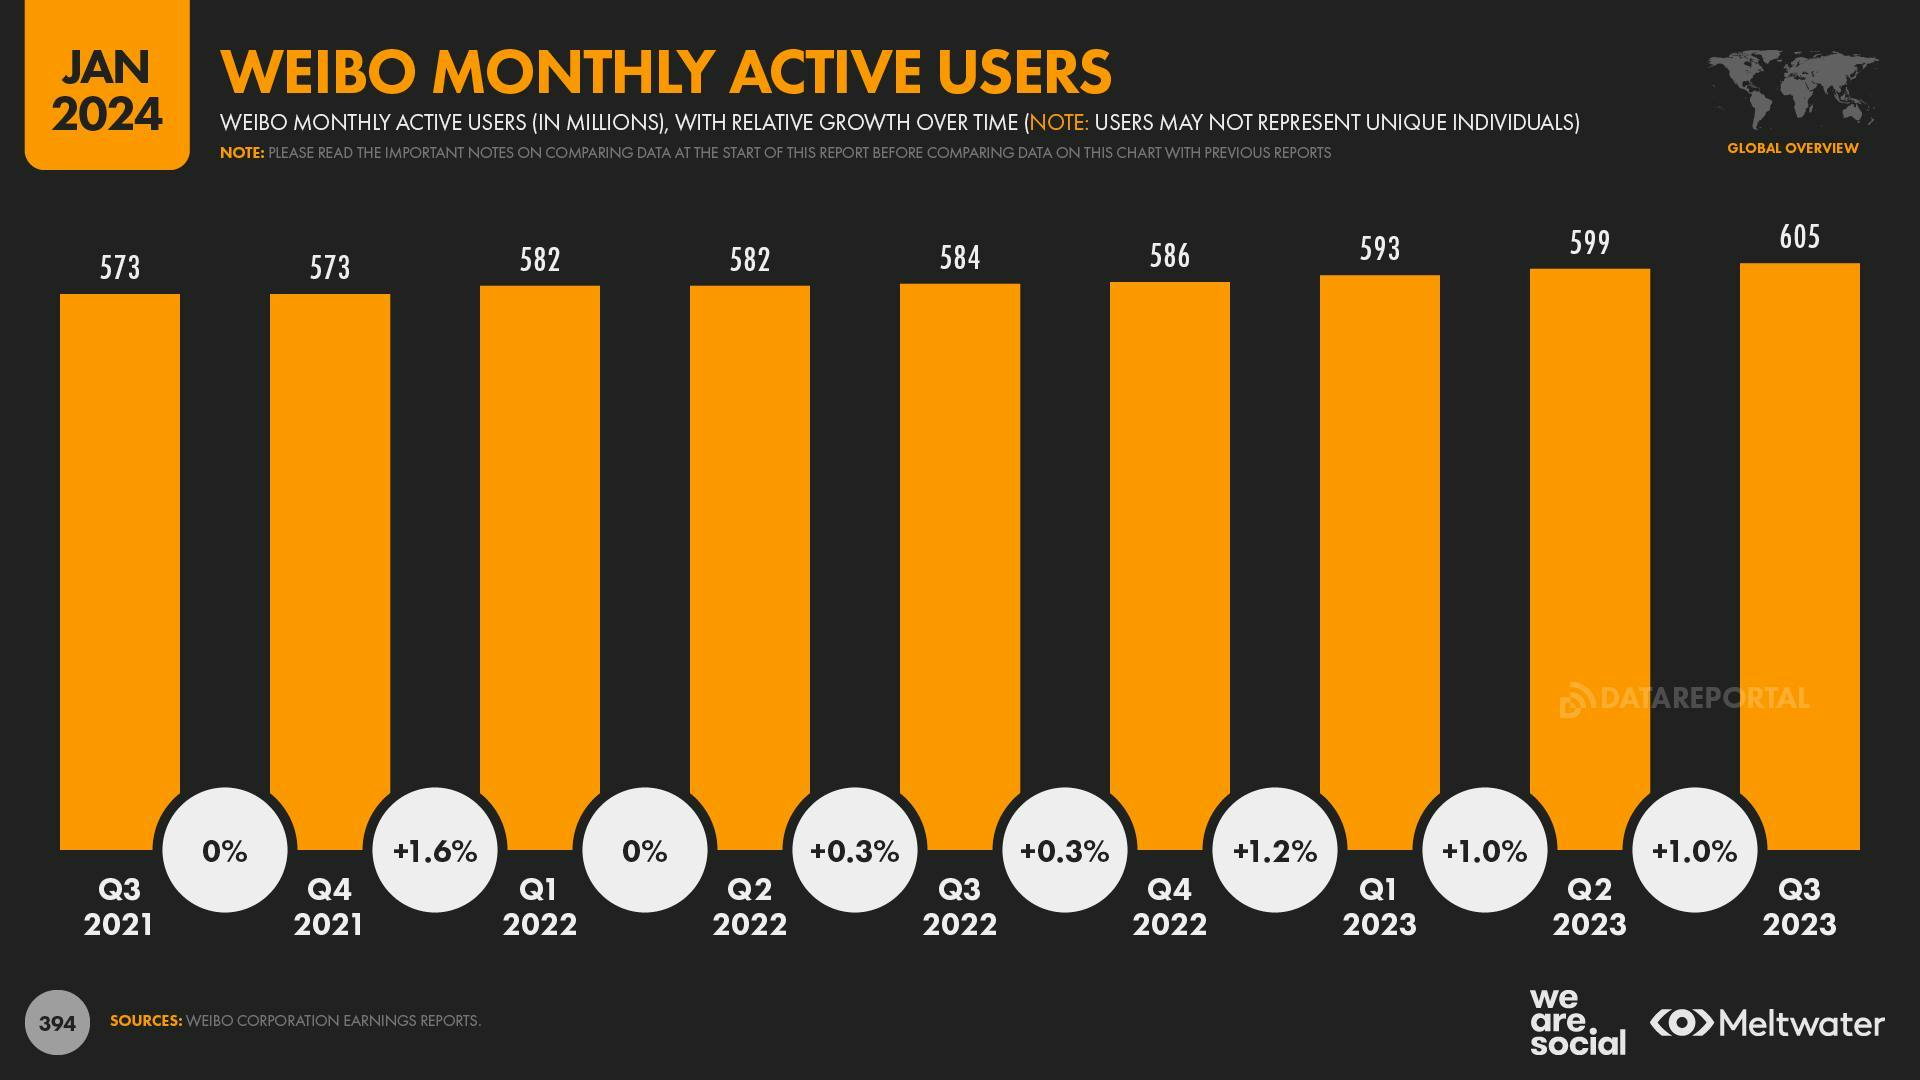 Weibo monthly active users